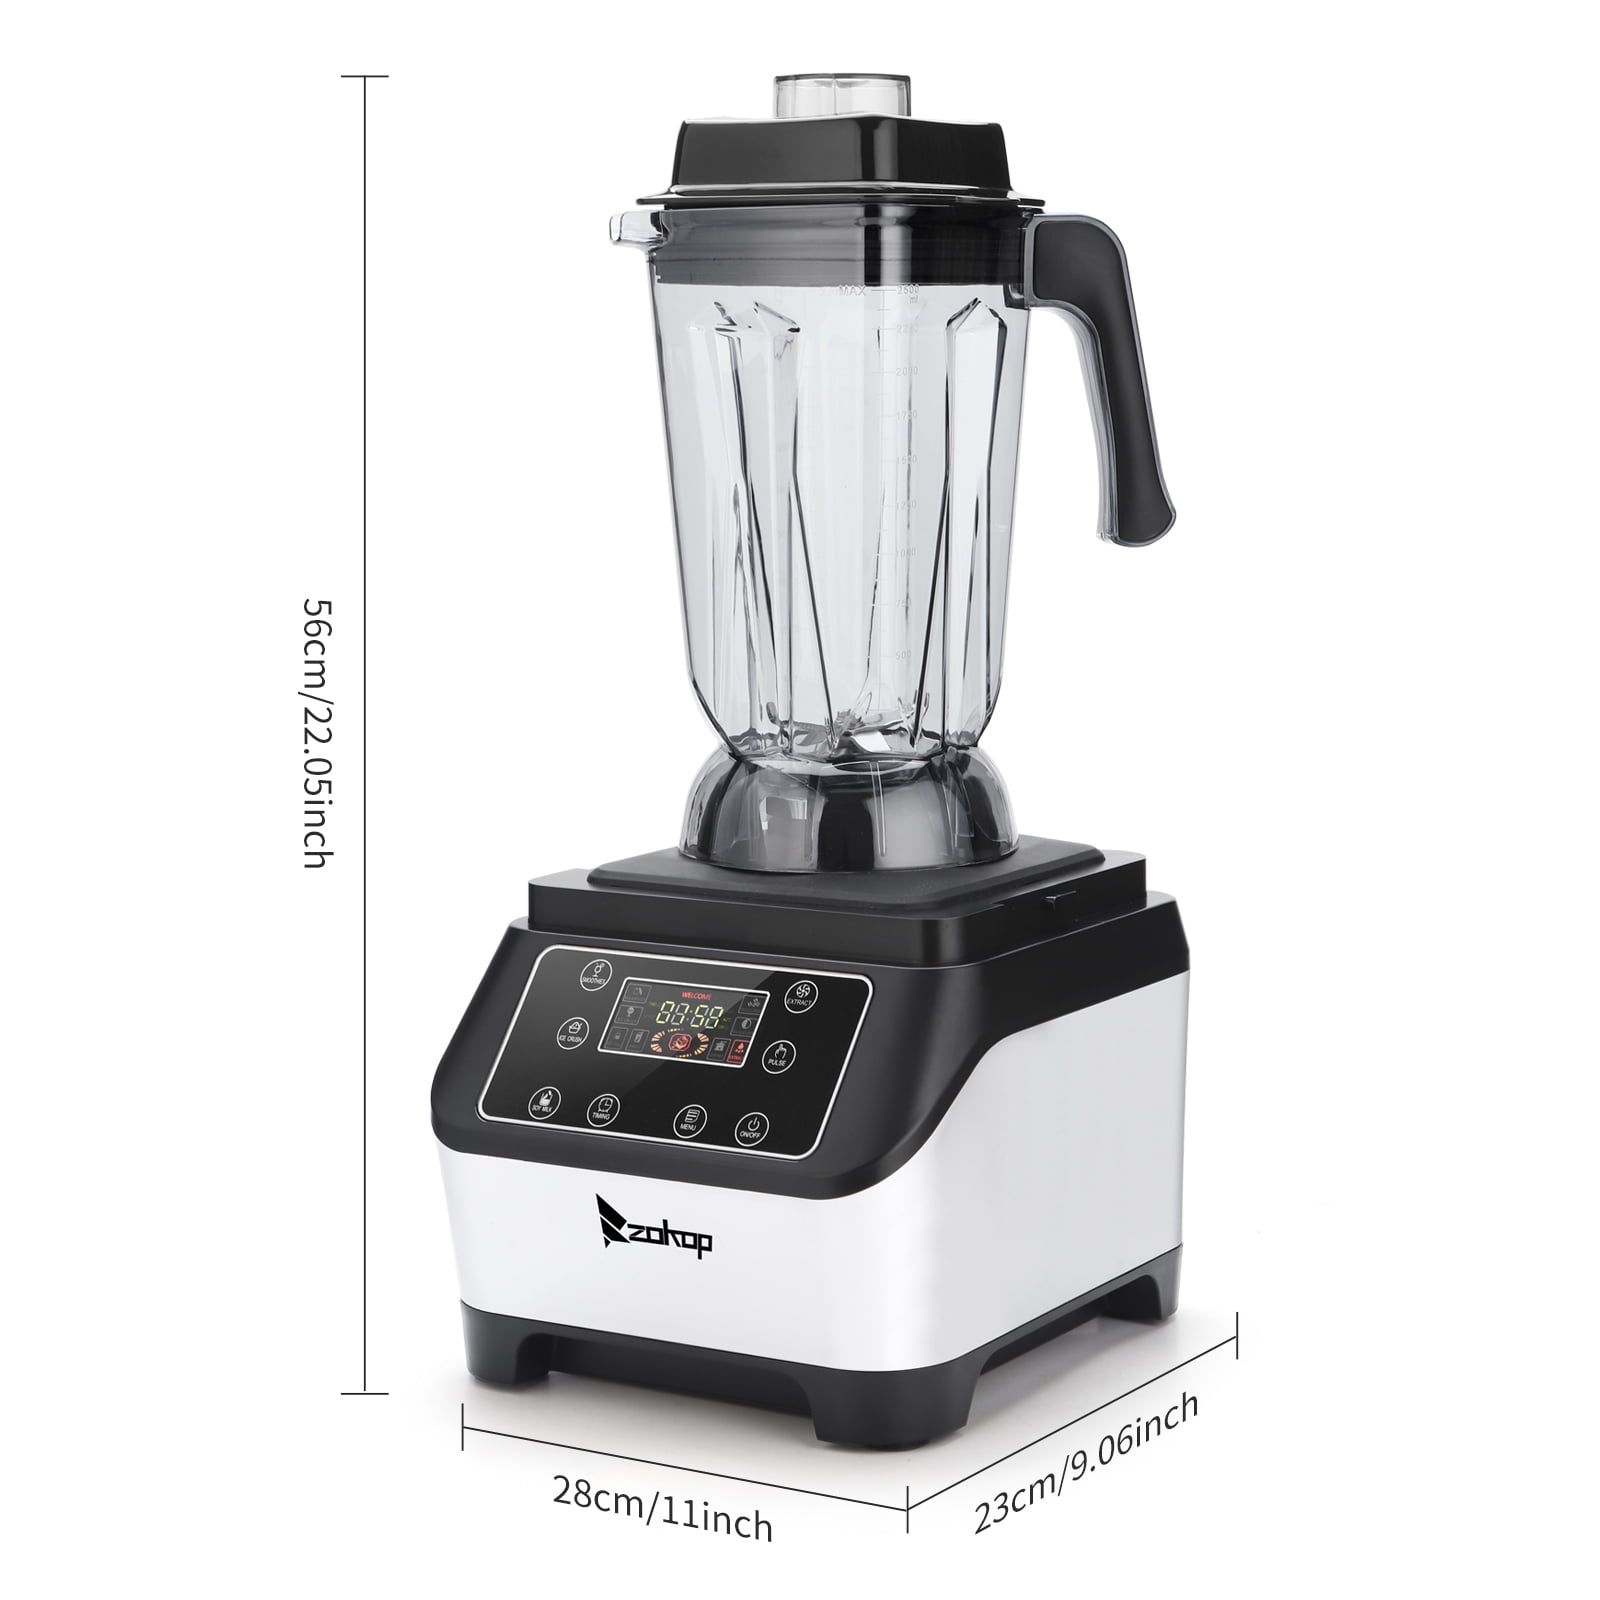 Aeitto® Blenders for Kitchen, Blender for Shakes and Smoothies with 1500- Watt Motor, 68 Oz Large Capacity, Countertop Professional Blenders for Ice  Crush, Frozen Drink, Silver 